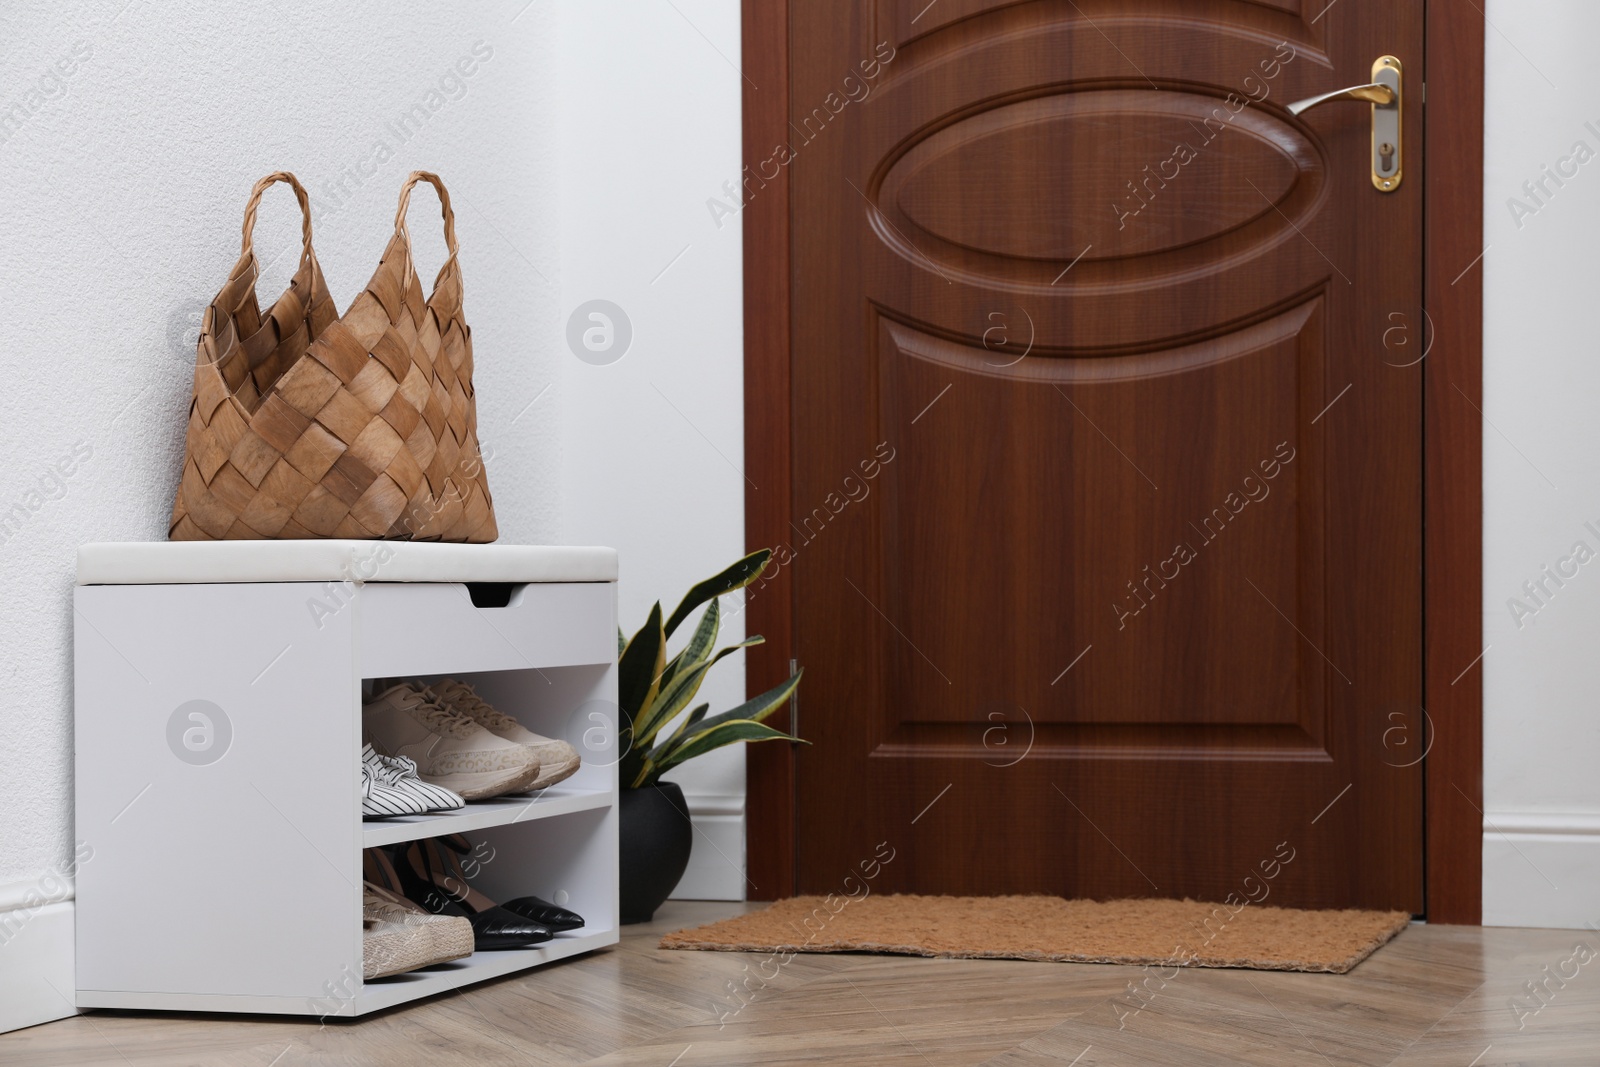 Photo of Shelving unit with shoes, houseplant and door mat in hall